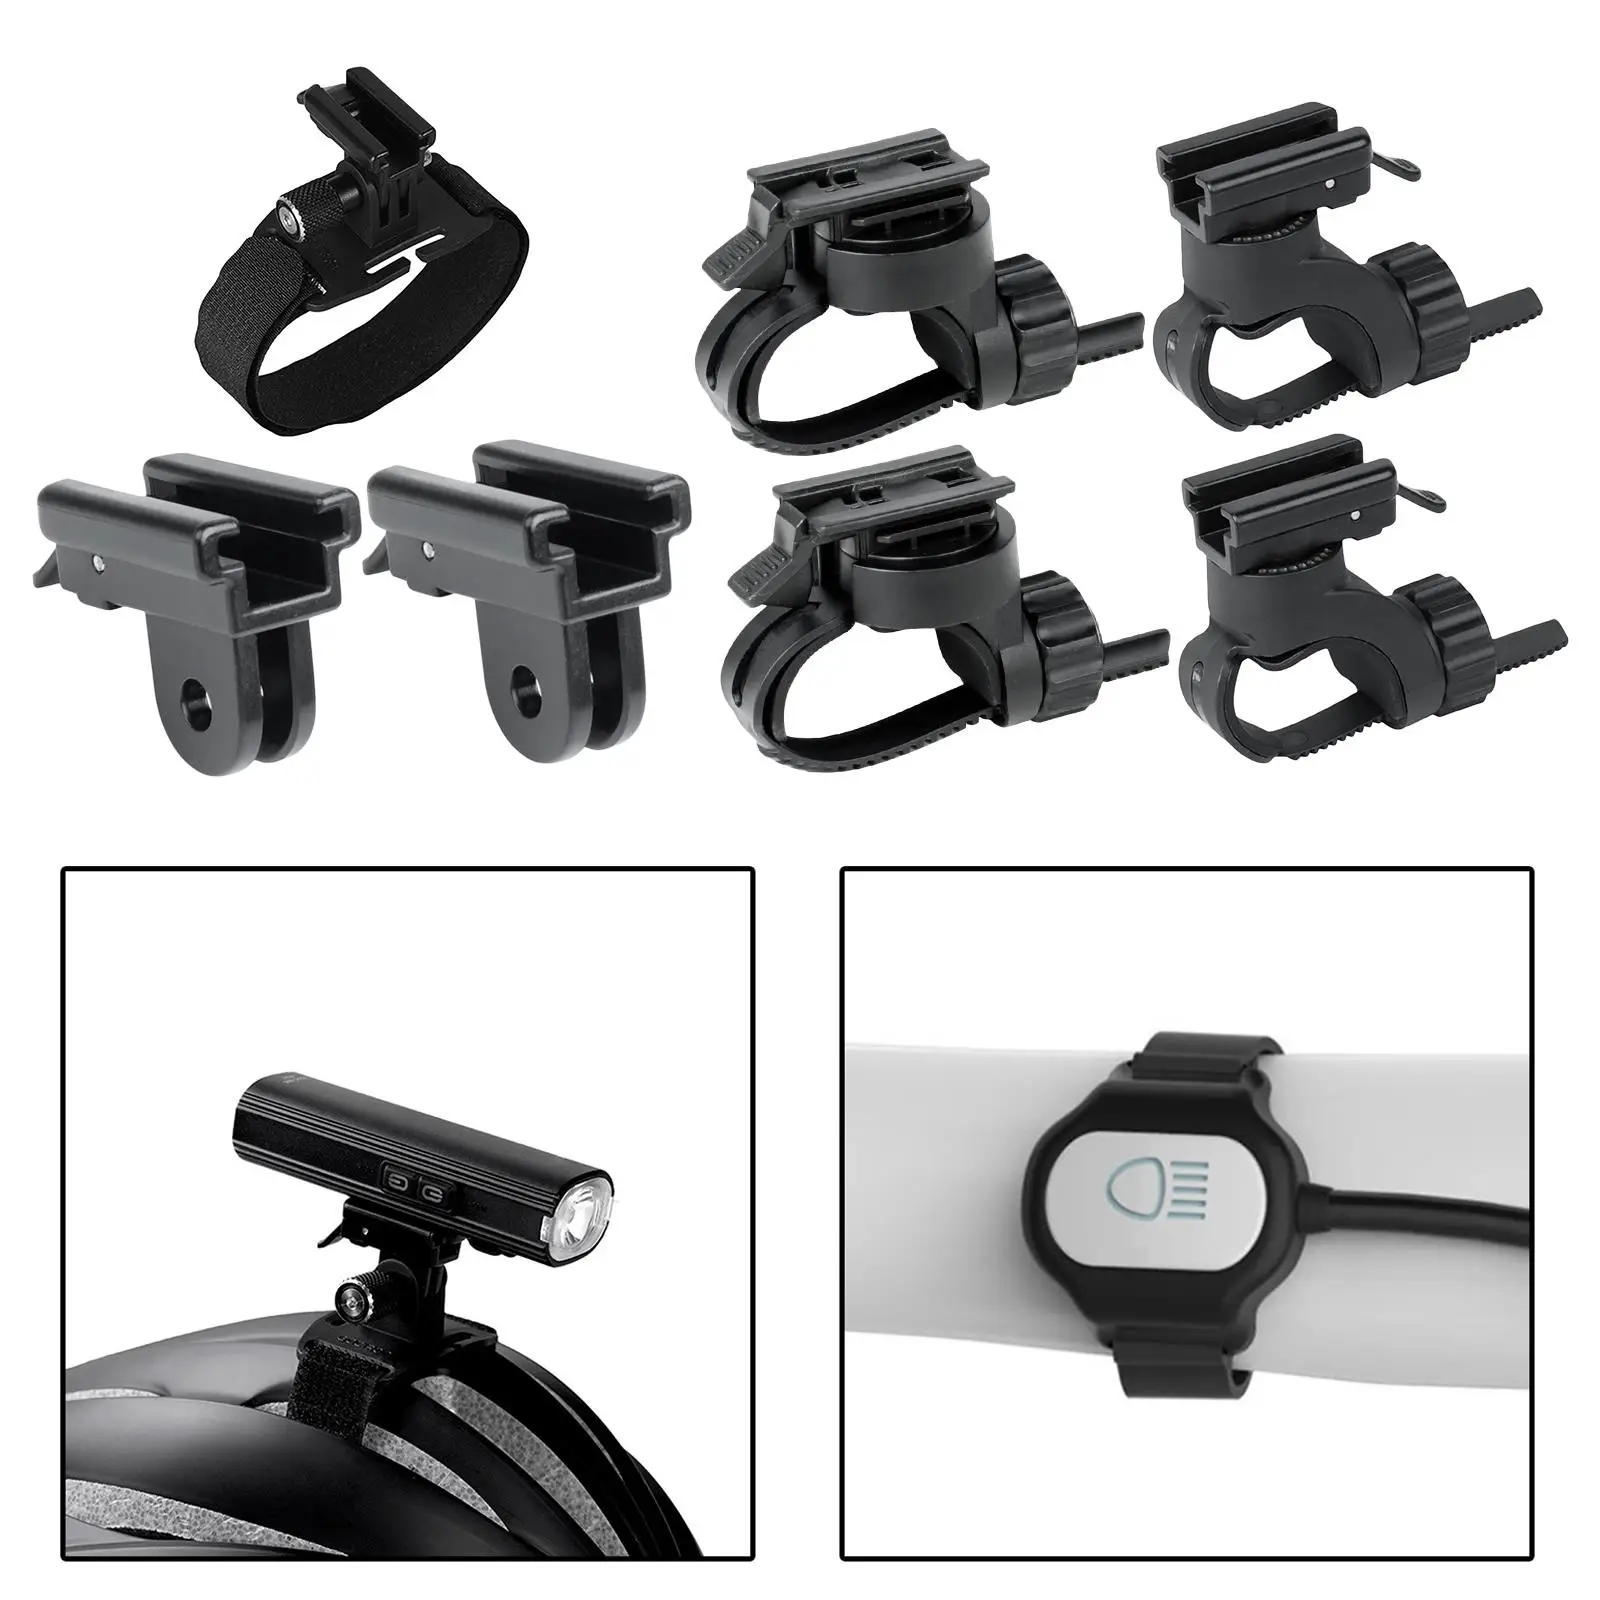 Bike Front Lamp Clip Clamp Headlight Holder Mounting Adjustable Flashlight Mount Stand for 7-43mm Handlebar Extension Universal